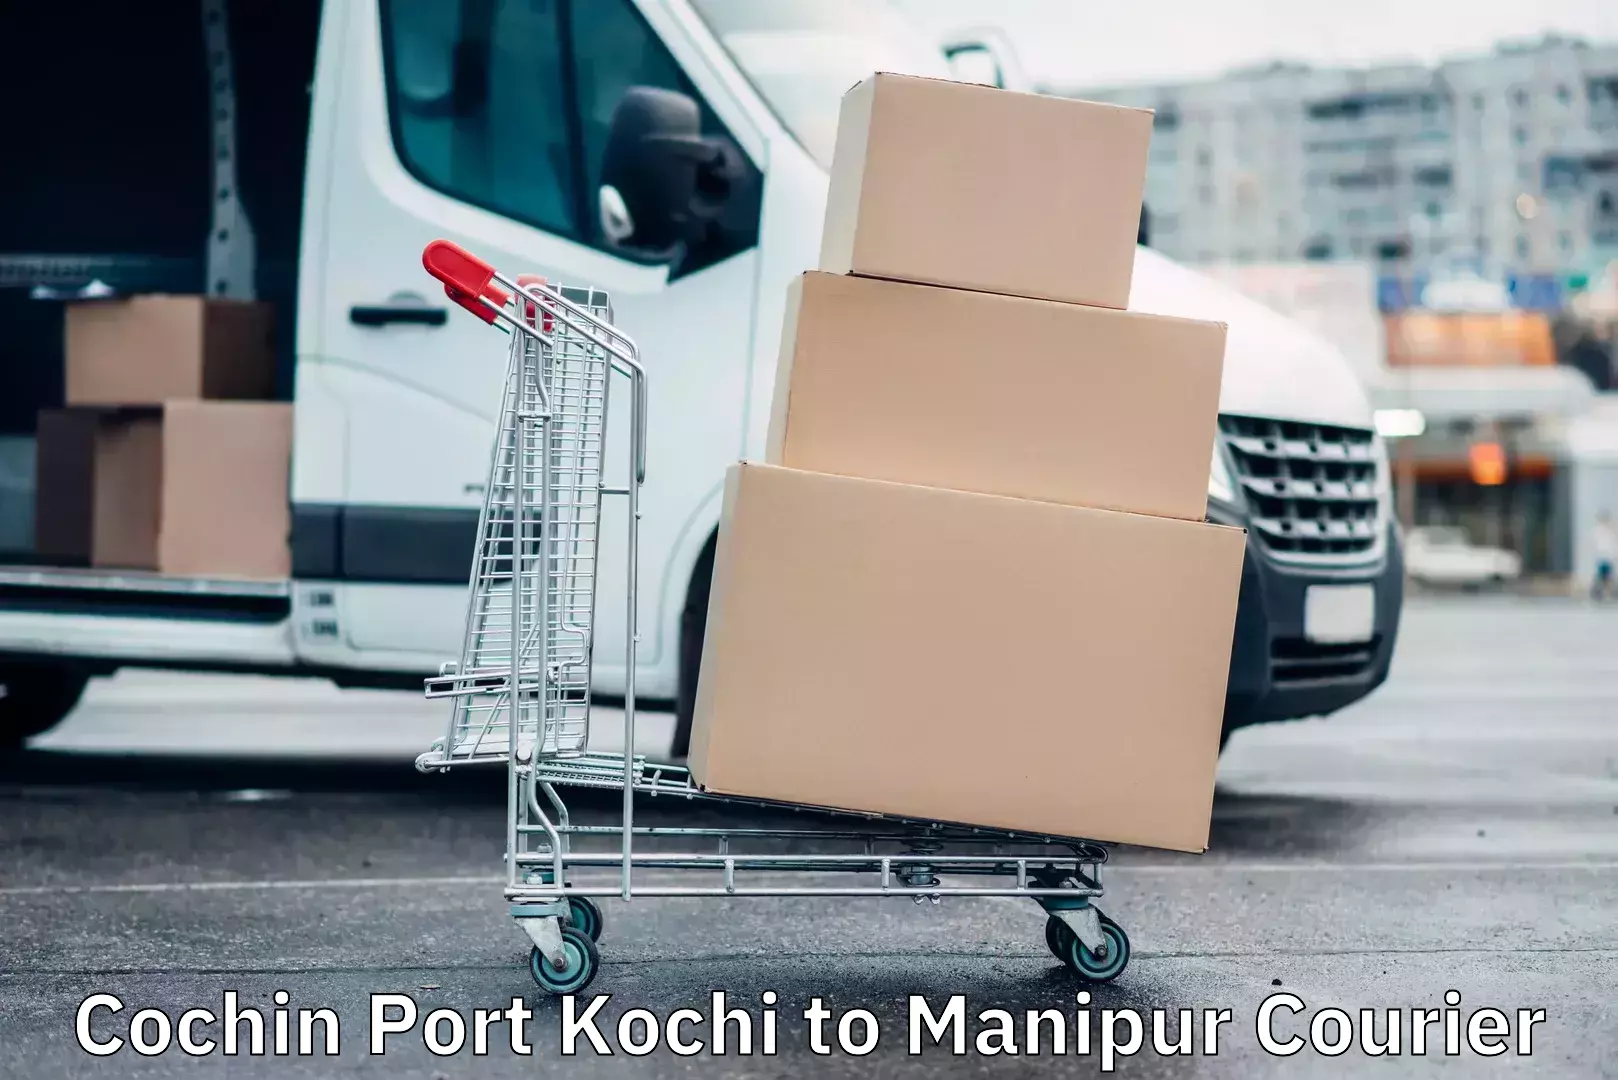 Automated parcel services Cochin Port Kochi to Manipur